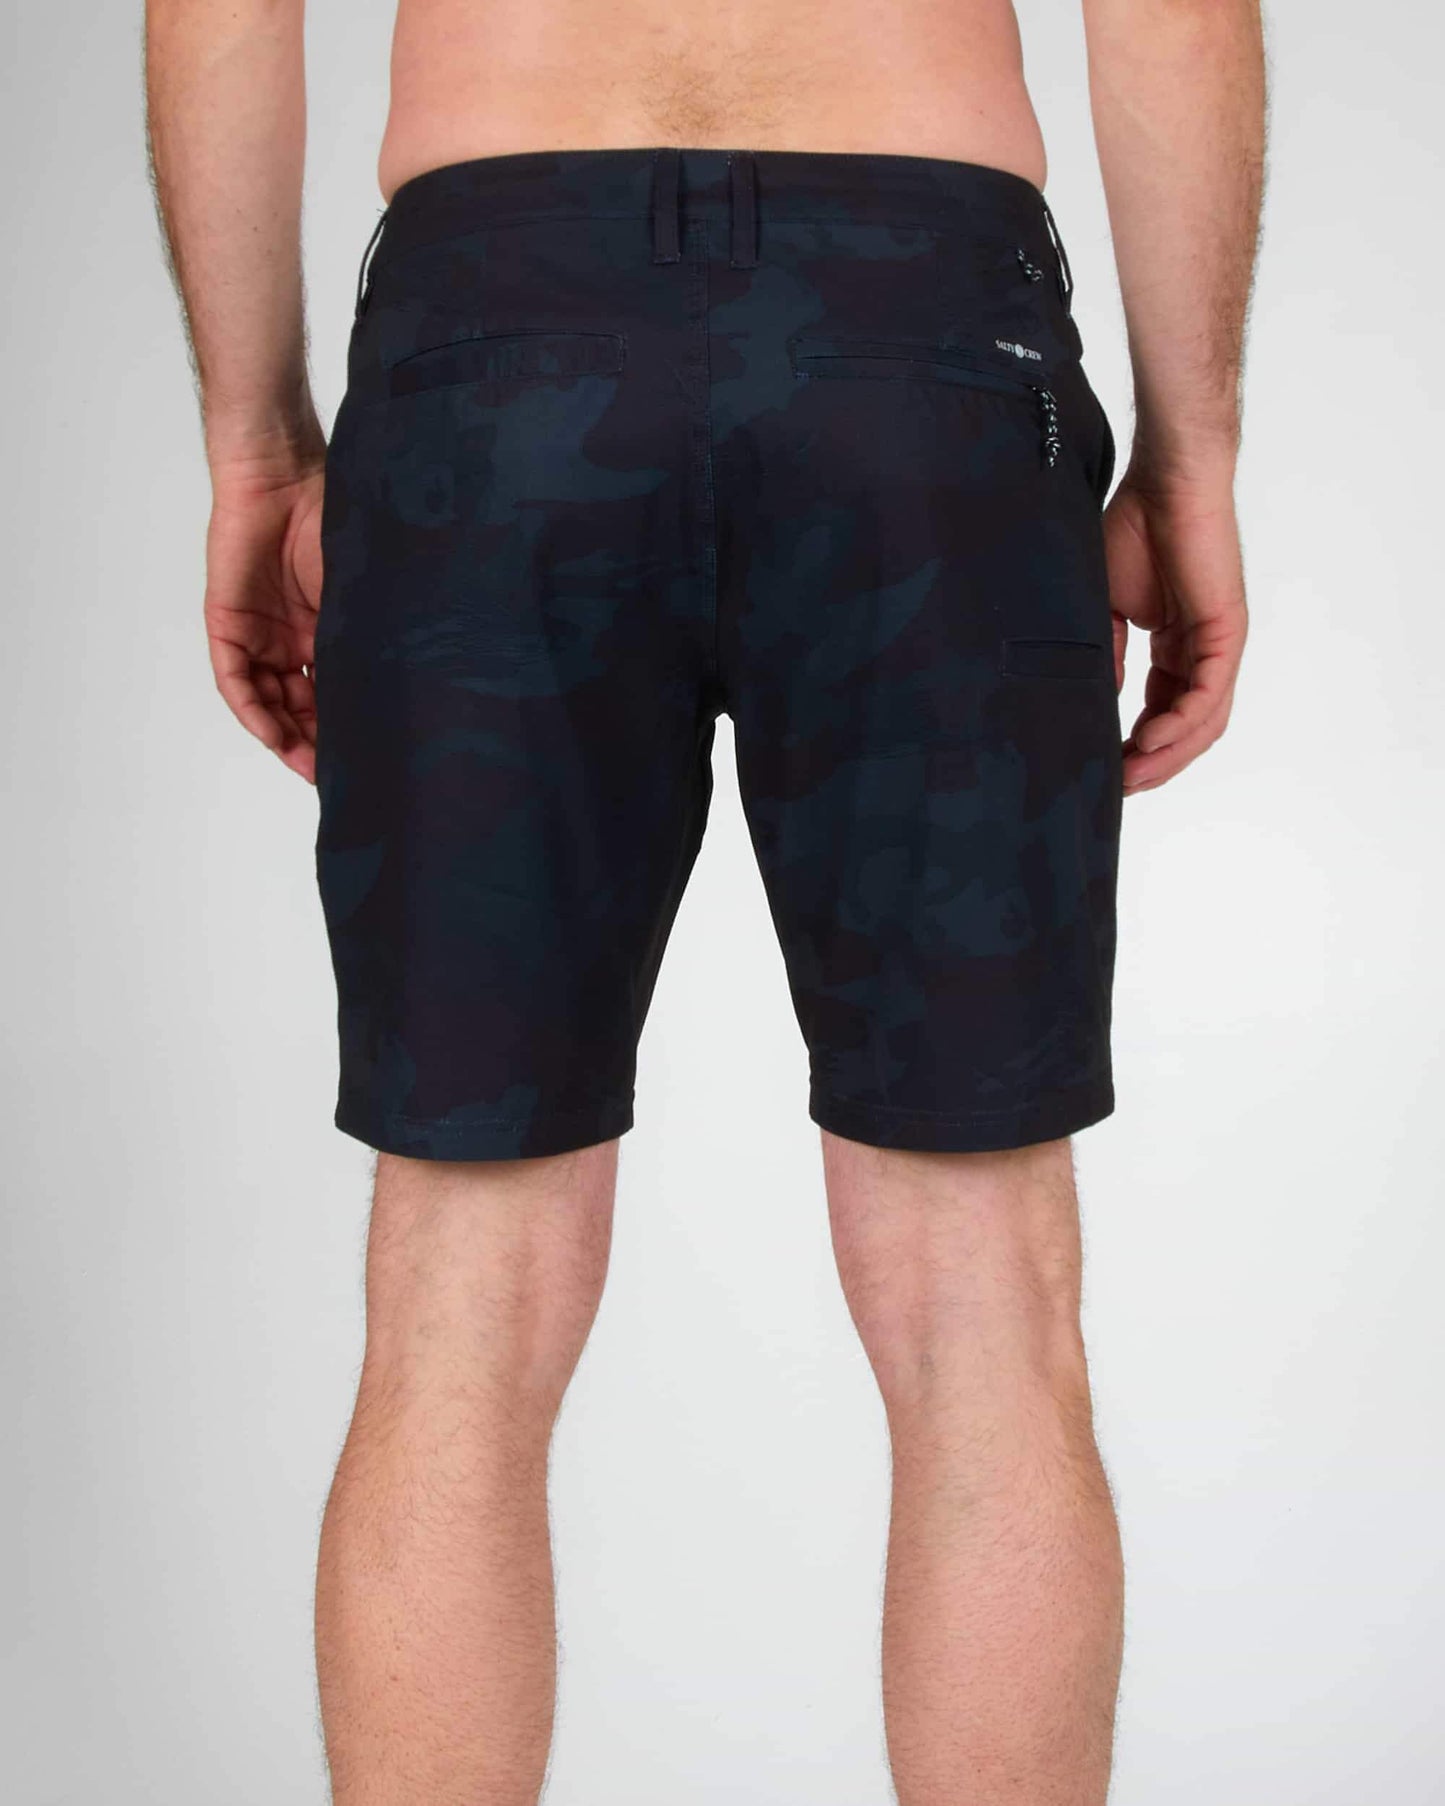 Salty Crew Hommes - Drifter 2 Perforated - Black Camo